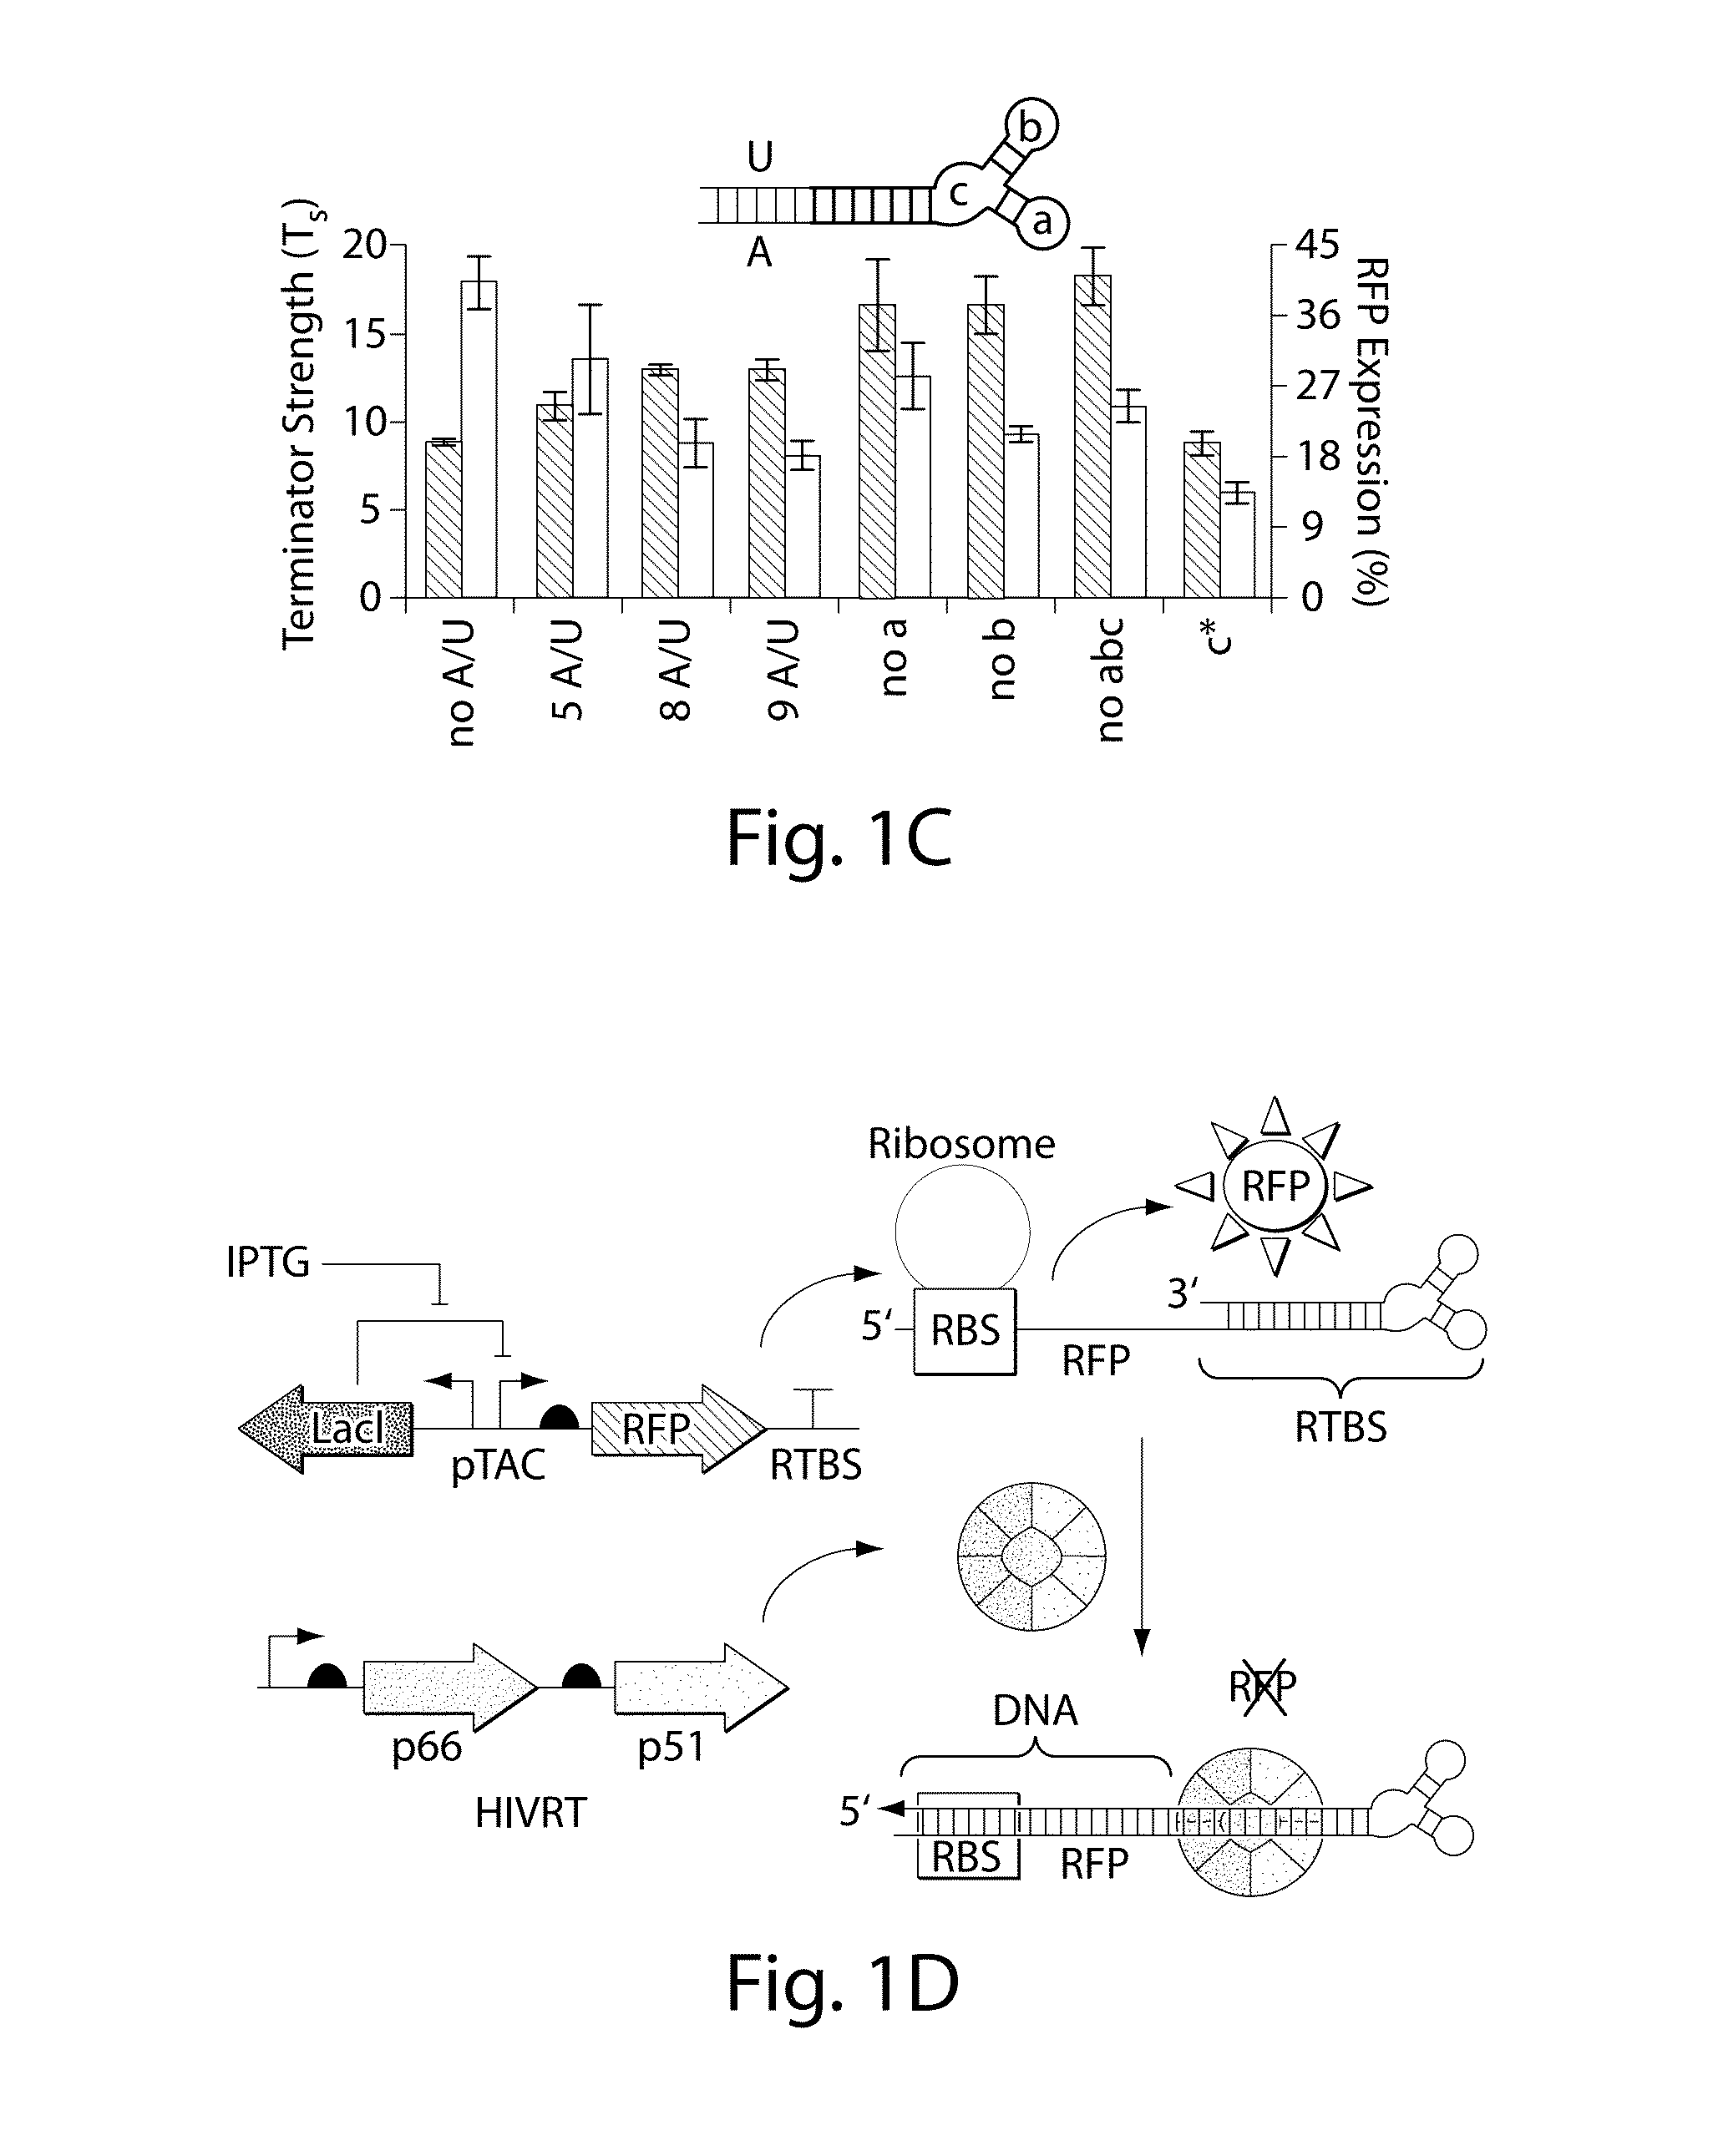 Engineering DNA assembly in vivo and methods of making and using the reverse transcriptase technology